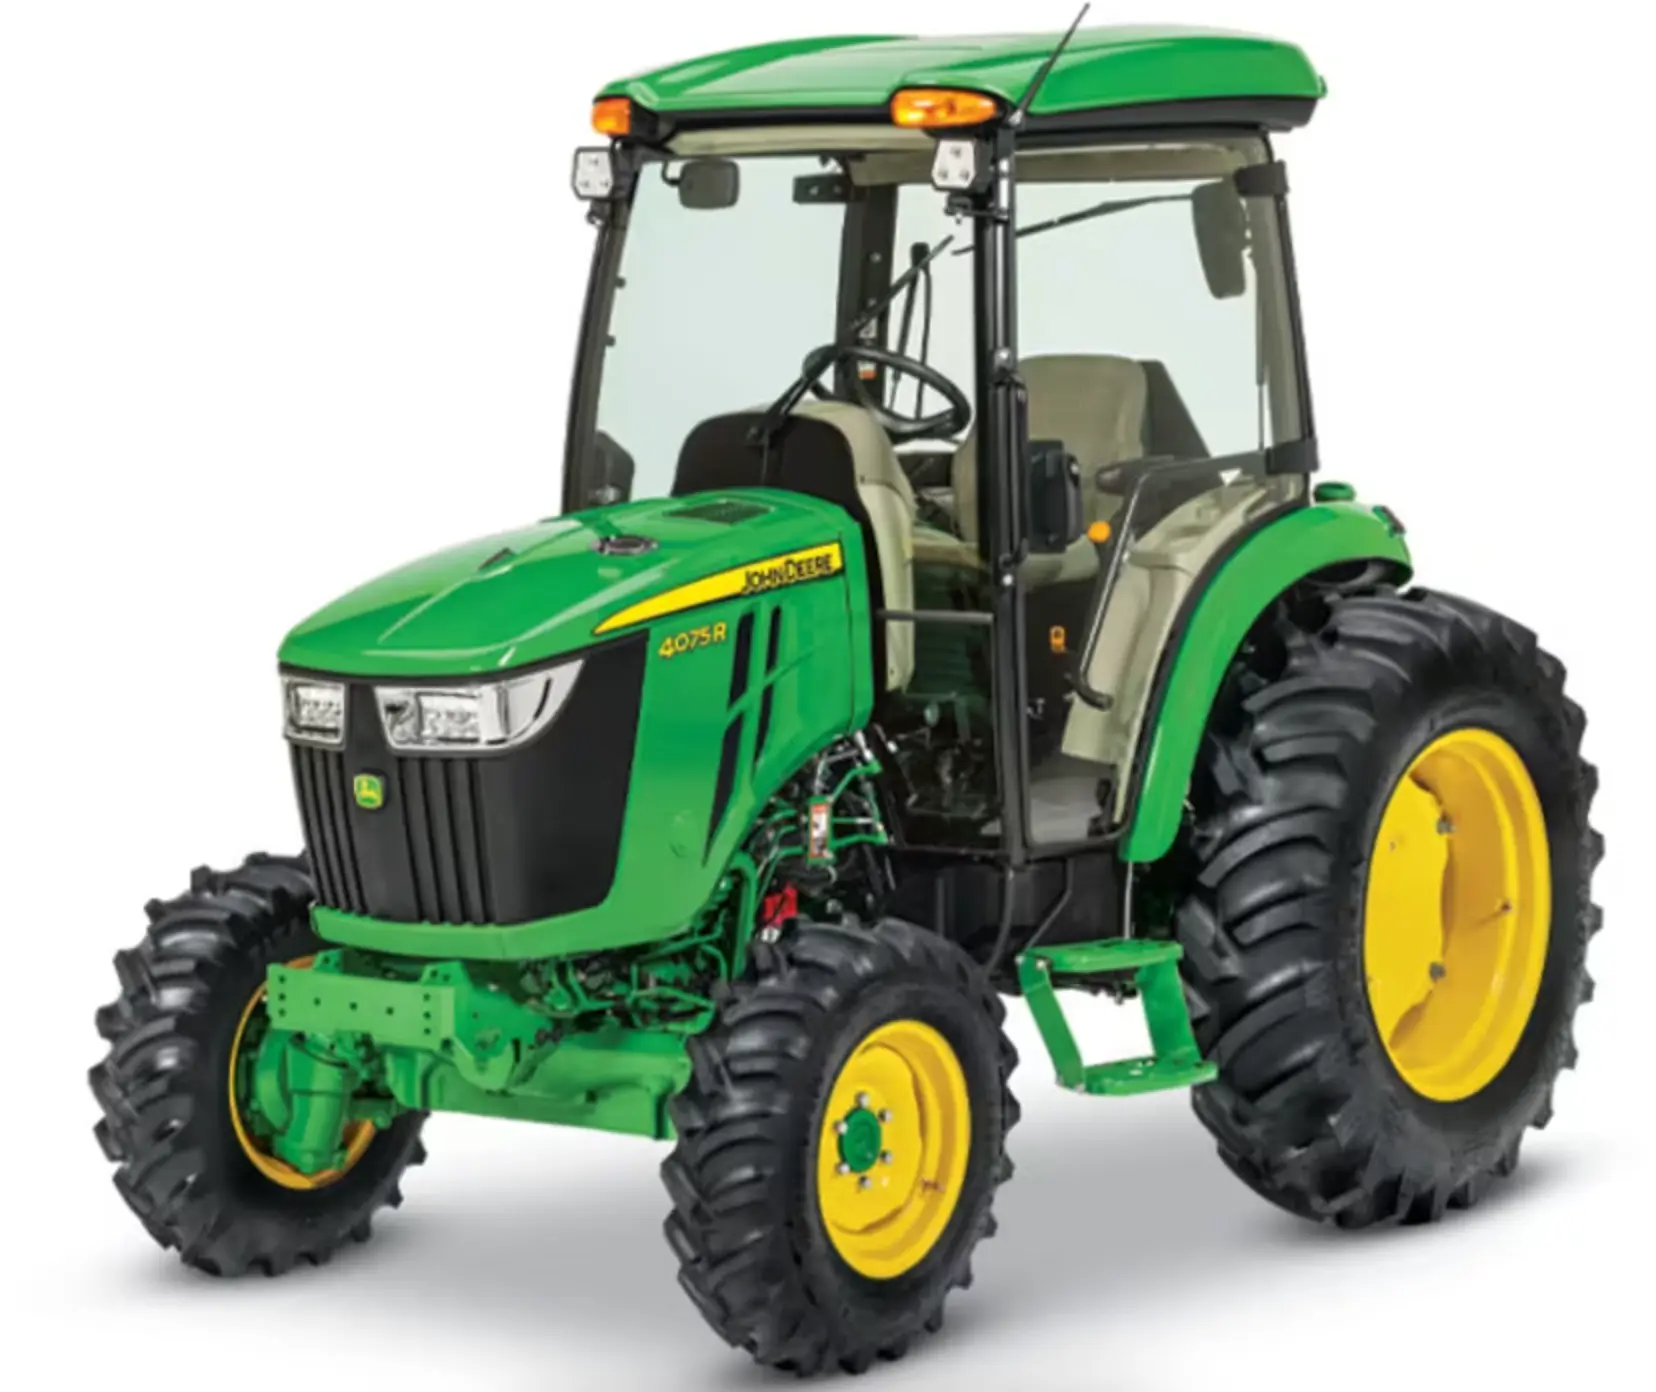 A 4075R Utility Tractor on a white background